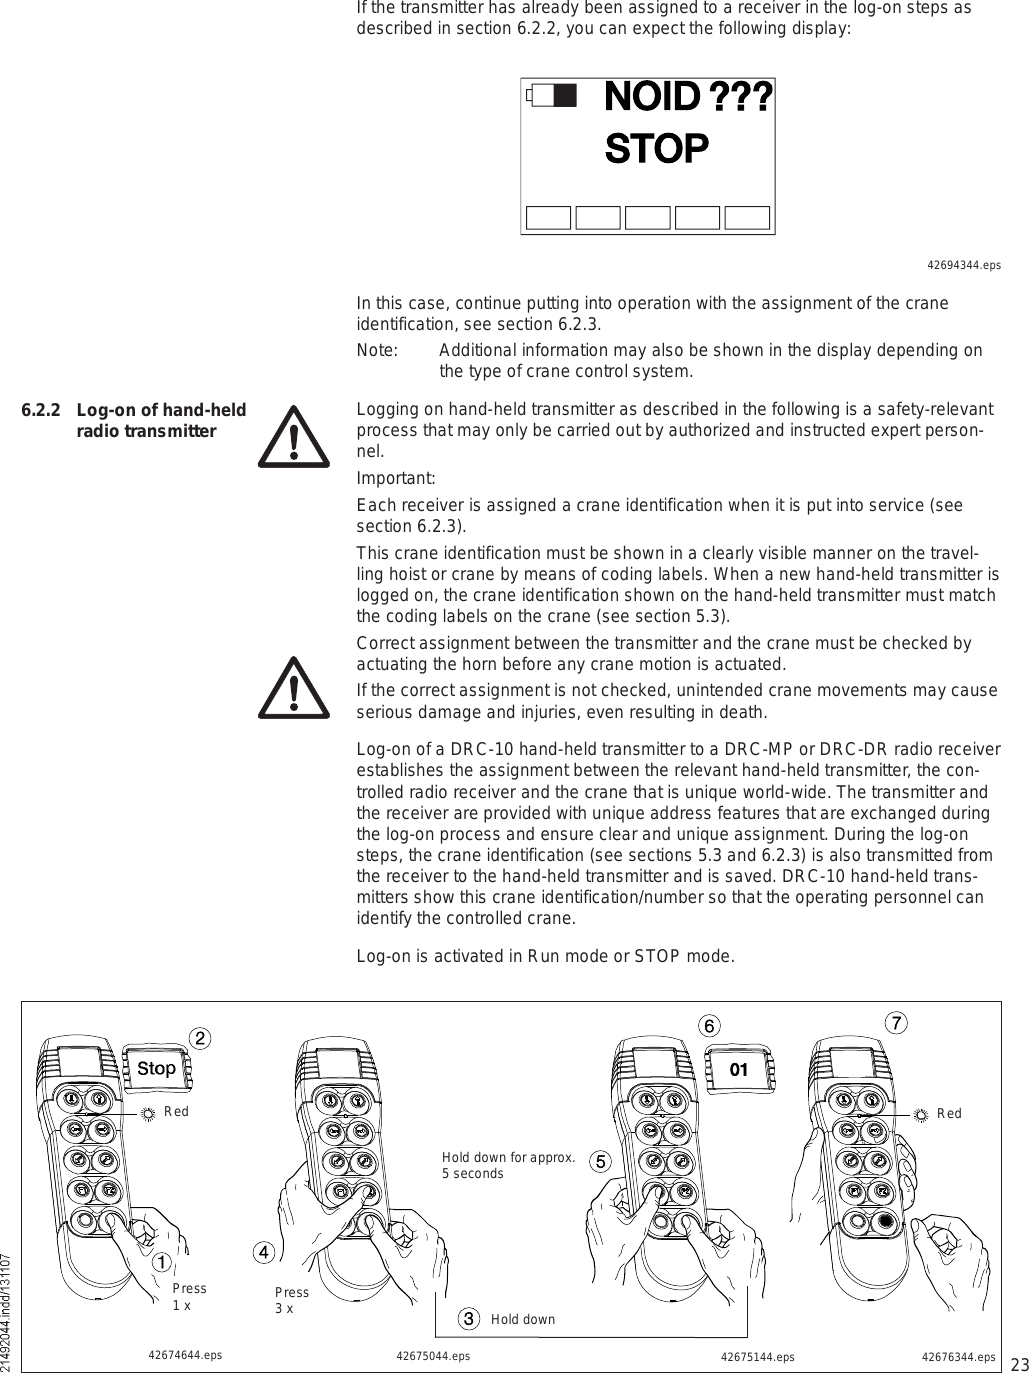 23If the transmitter has already been assigned to a receiver in the log-on steps as described in section 6.2.2, you can expect the following display:ÒÑ×ÜÍÌÑÐáááIn this case, continue putting into operation with the assignment of the crane identification, see section 6.2.3.Note: Additional information may also be shown in the display depending on the type of crane control system.Logging on hand-held transmitter as described in the following is a safety-relevant process that may only be carried out by authorized and instructed expert person-nel.Important:Each receiver is assigned a crane identification when it is put into service (see section 6.2.3).This crane identification must be shown in a clearly visible manner on the travel-ling hoist or crane by means of coding labels. When a new hand-held transmitter is logged on, the crane identification shown on the hand-held transmitter must match the coding labels on the crane (see section 5.3).Correct assignment between the transmitter and the crane must be checked by actuating the horn before any crane motion is actuated. If the correct assignment is not checked, unintended crane movements may cause serious damage and injuries, even resulting in death. Log-on of a DRC-10 hand-held transmitter to a DRC-MP or DRC-DR radio receiver establishes the assignment between the relevant hand-held transmitter, the con-trolled radio receiver and the crane that is unique world-wide. The transmitter and the receiver are provided with unique address features that are exchanged during the log-on process and ensure clear and unique assignment. During the log-on steps, the crane identification (see sections 5.3 and 6.2.3) is also transmitted from the receiver to the hand-held transmitter and is saved. DRC-10 hand-held trans-mitters show this crane identification/number so that the operating personnel can identify the controlled crane.Log-on is activated in Run mode or STOP mode.6.2.2  Log-on of hand-held radio transmitter42676344.eps42675044.eps 42675144.eps42674644.epsíìPress3 xîïRedPress1 xðïëêHold down for approx. 5 secondsRedHold down42694344.epsï÷é